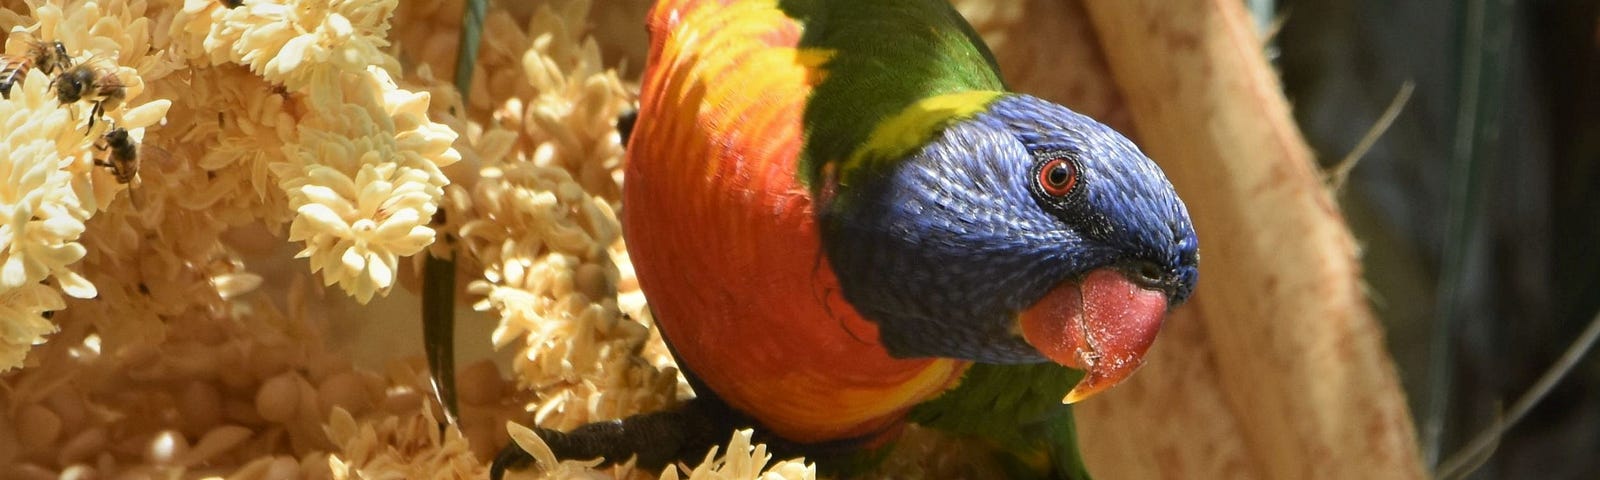 Rainbow Lorikeet with indigo head, red eye and beak, lime green collar, leaf green back and wings and orange and yellow breast, eyein the camera. The bird sits among profuse cream-coloured palm flowers.